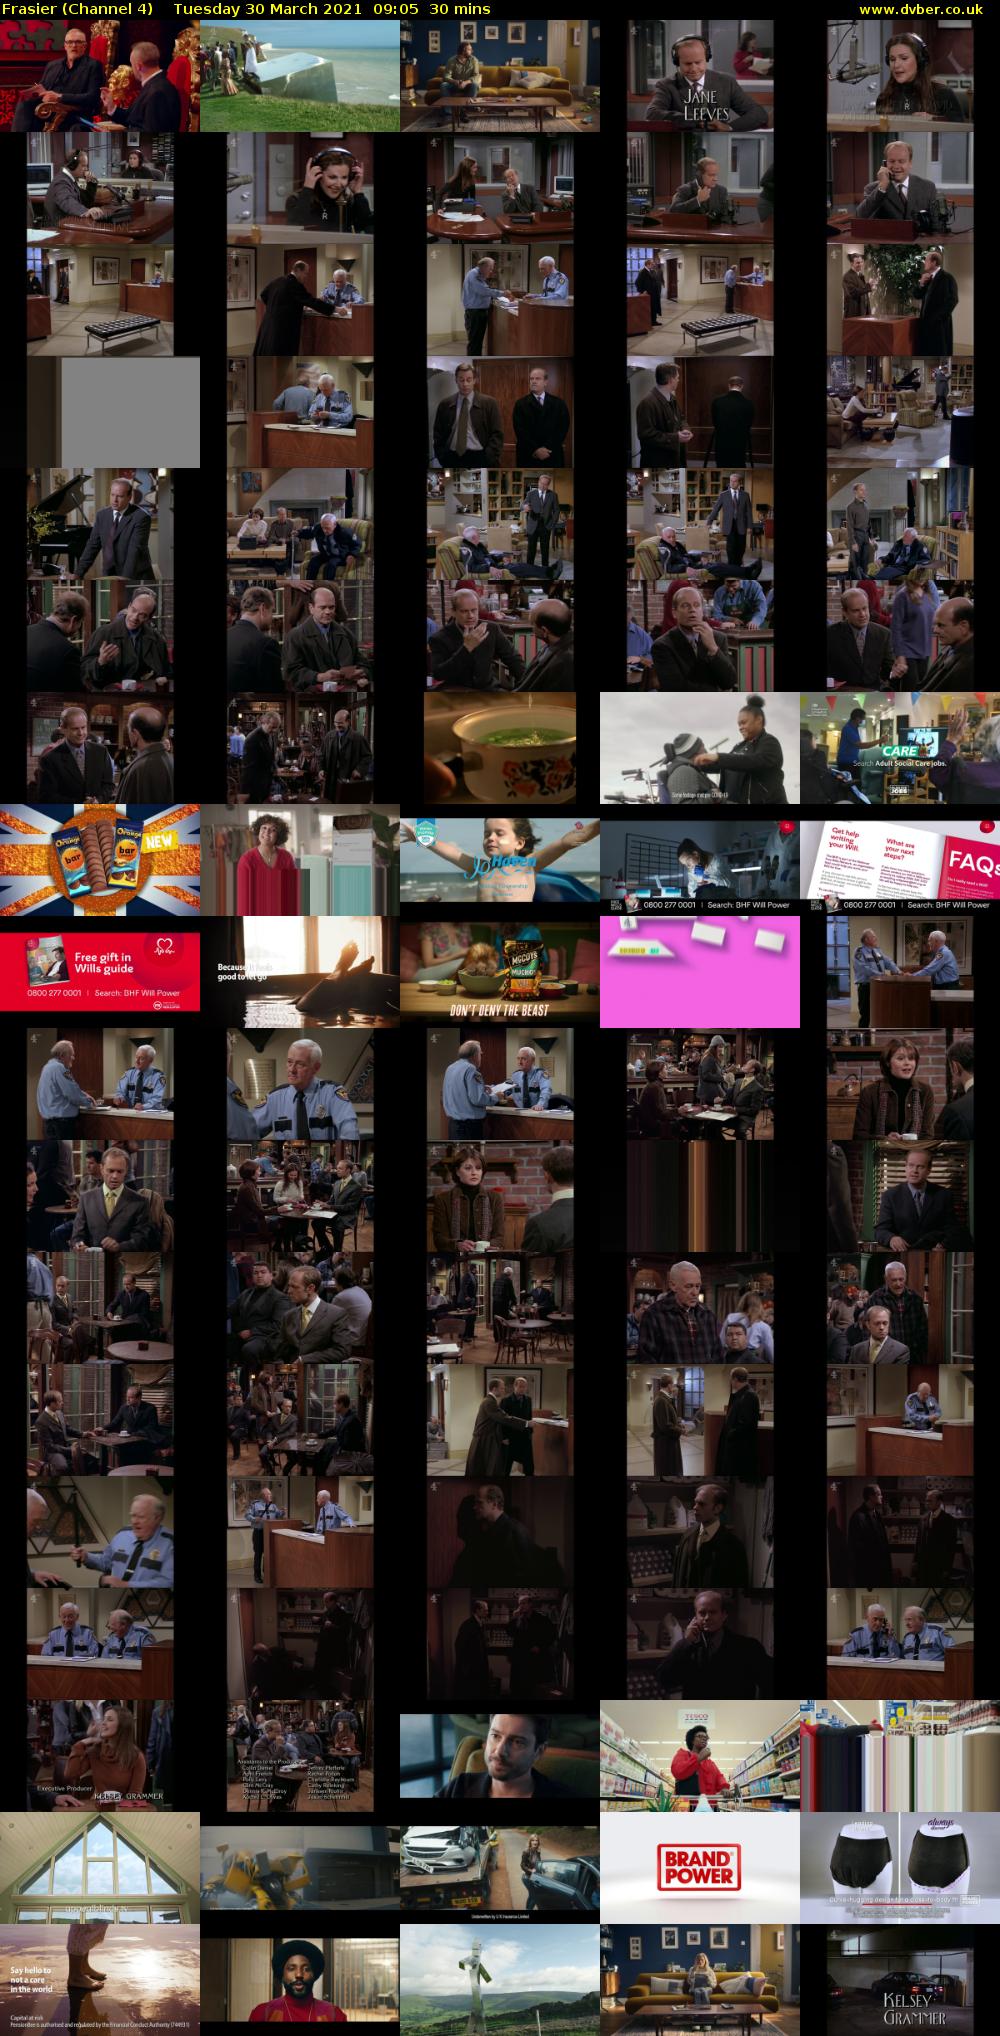 Frasier (Channel 4) Tuesday 30 March 2021 09:05 - 09:35